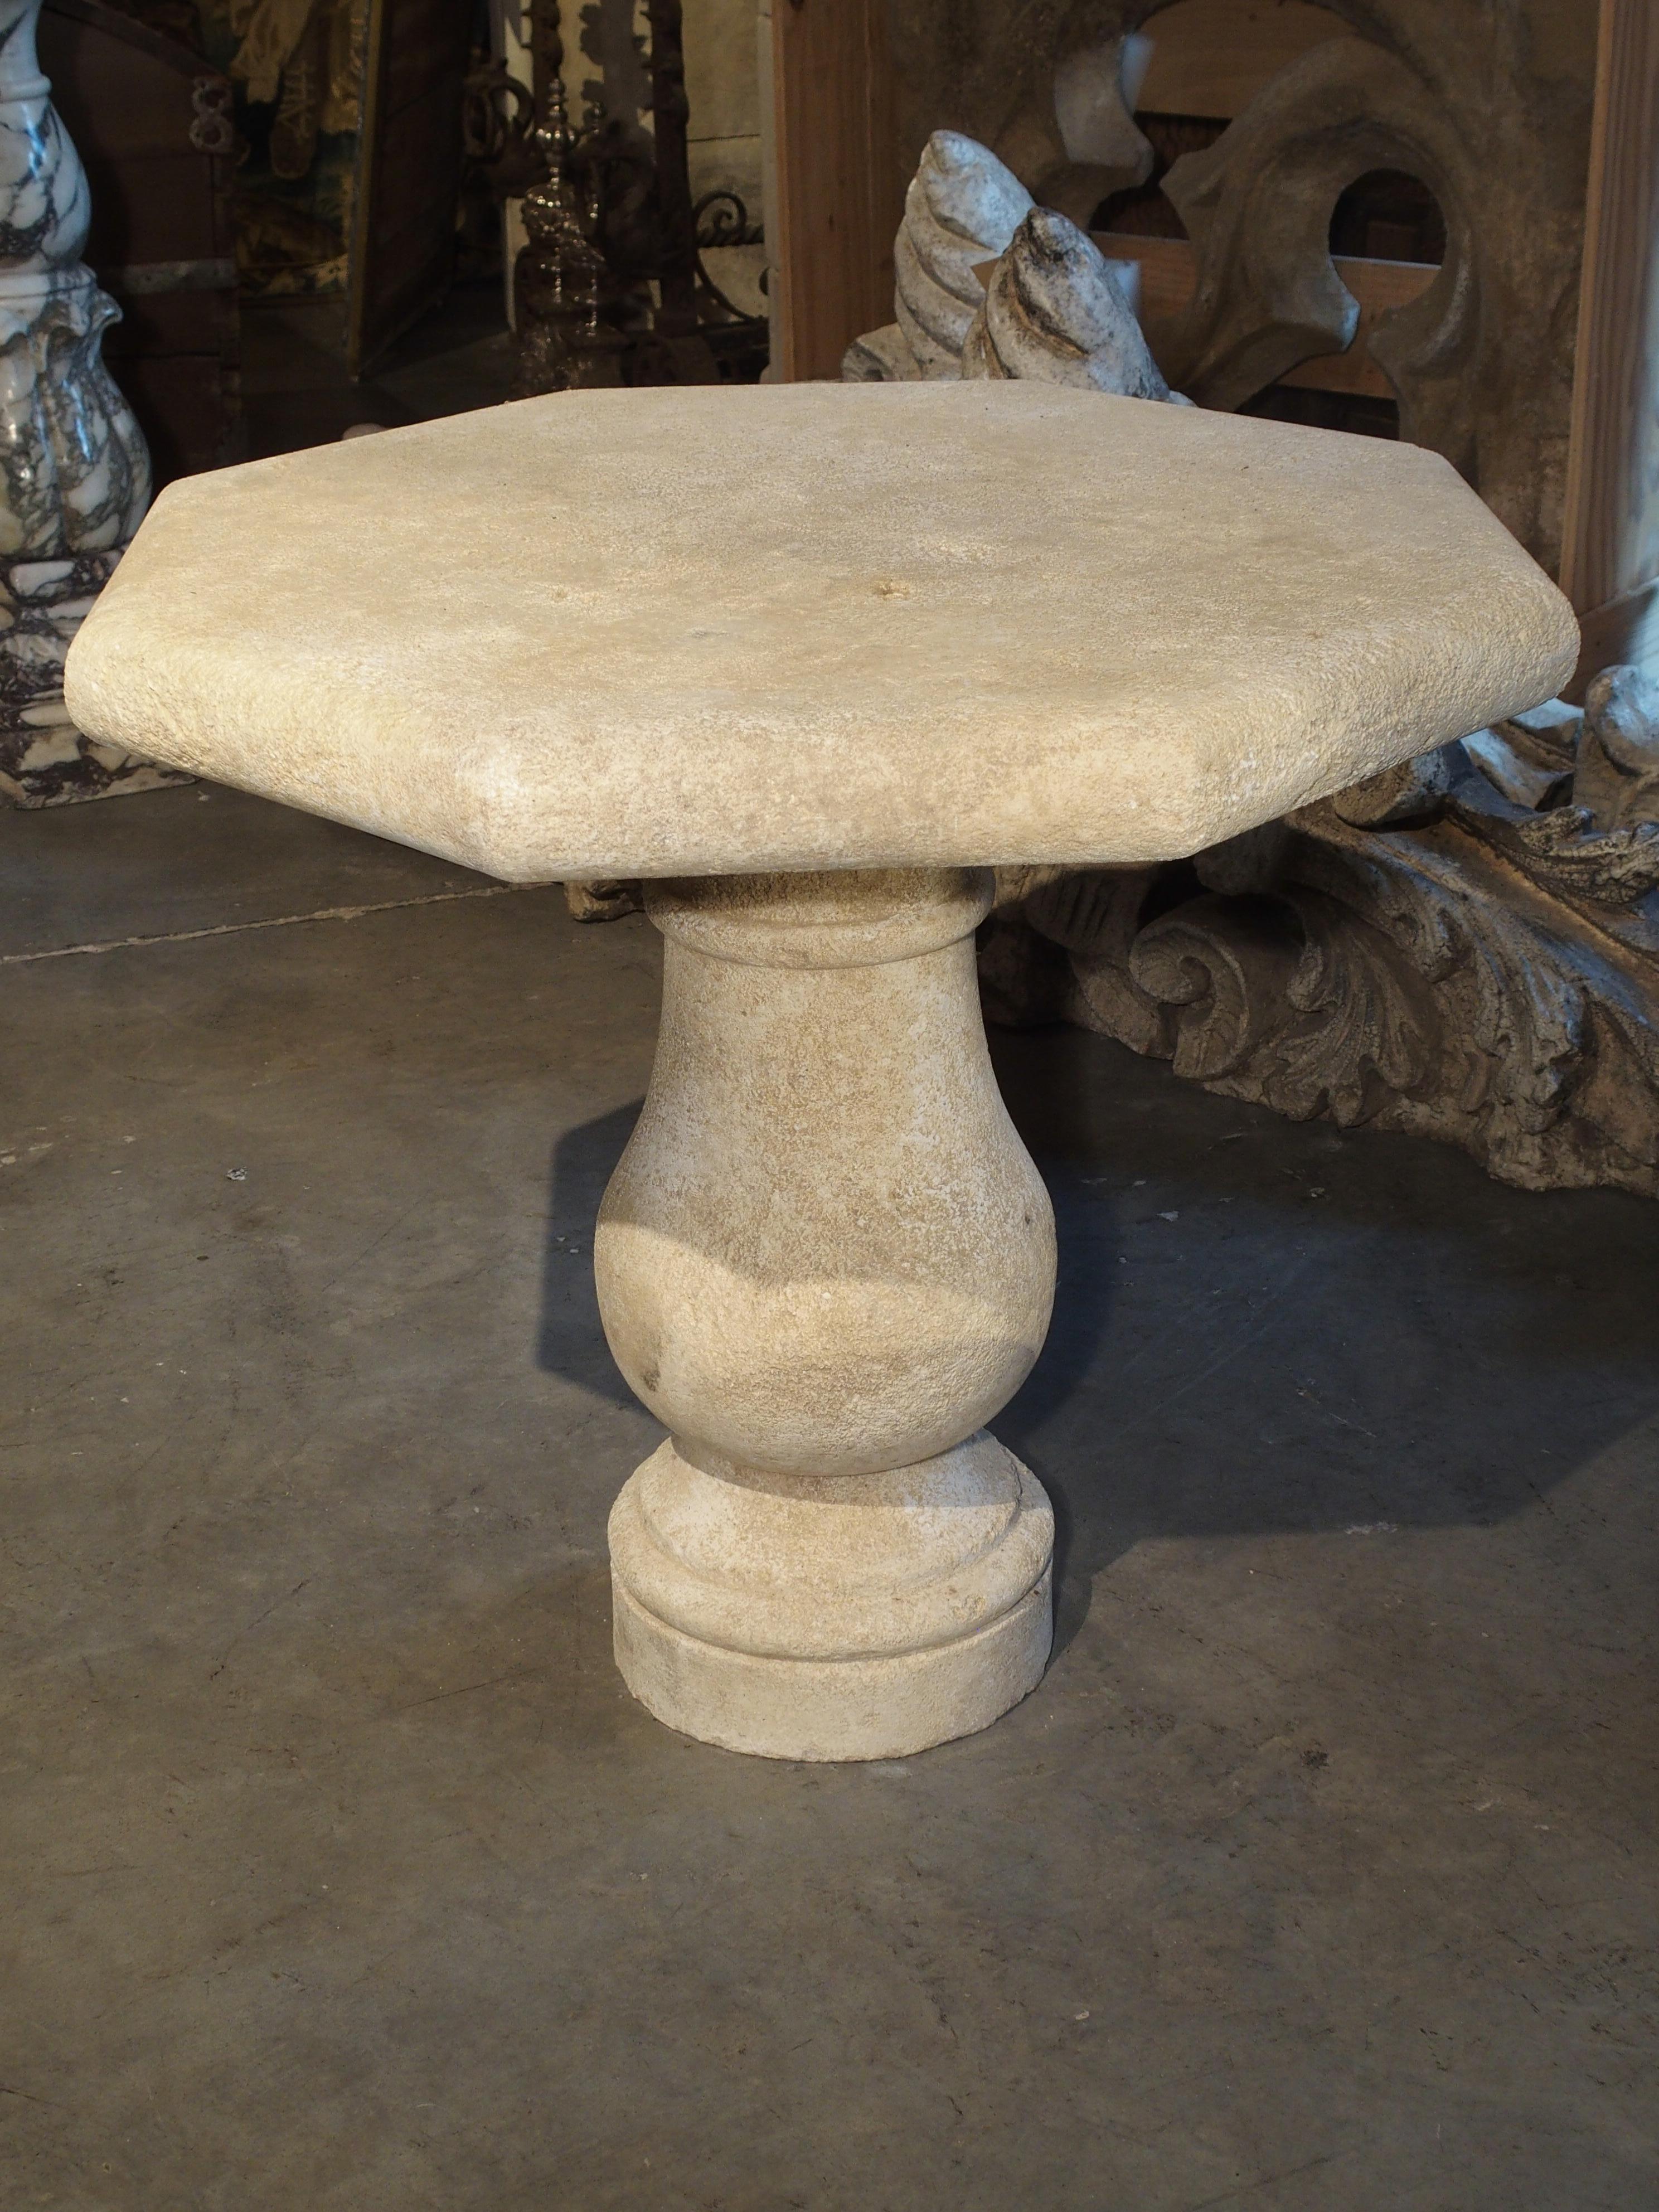 This charming stone table has an octagonal top sitting on a shaped baluster leg base. It can be considered a side table, occasional table or short bistro table. It comes from the South of France and has been carved from the famous Estaillade stone